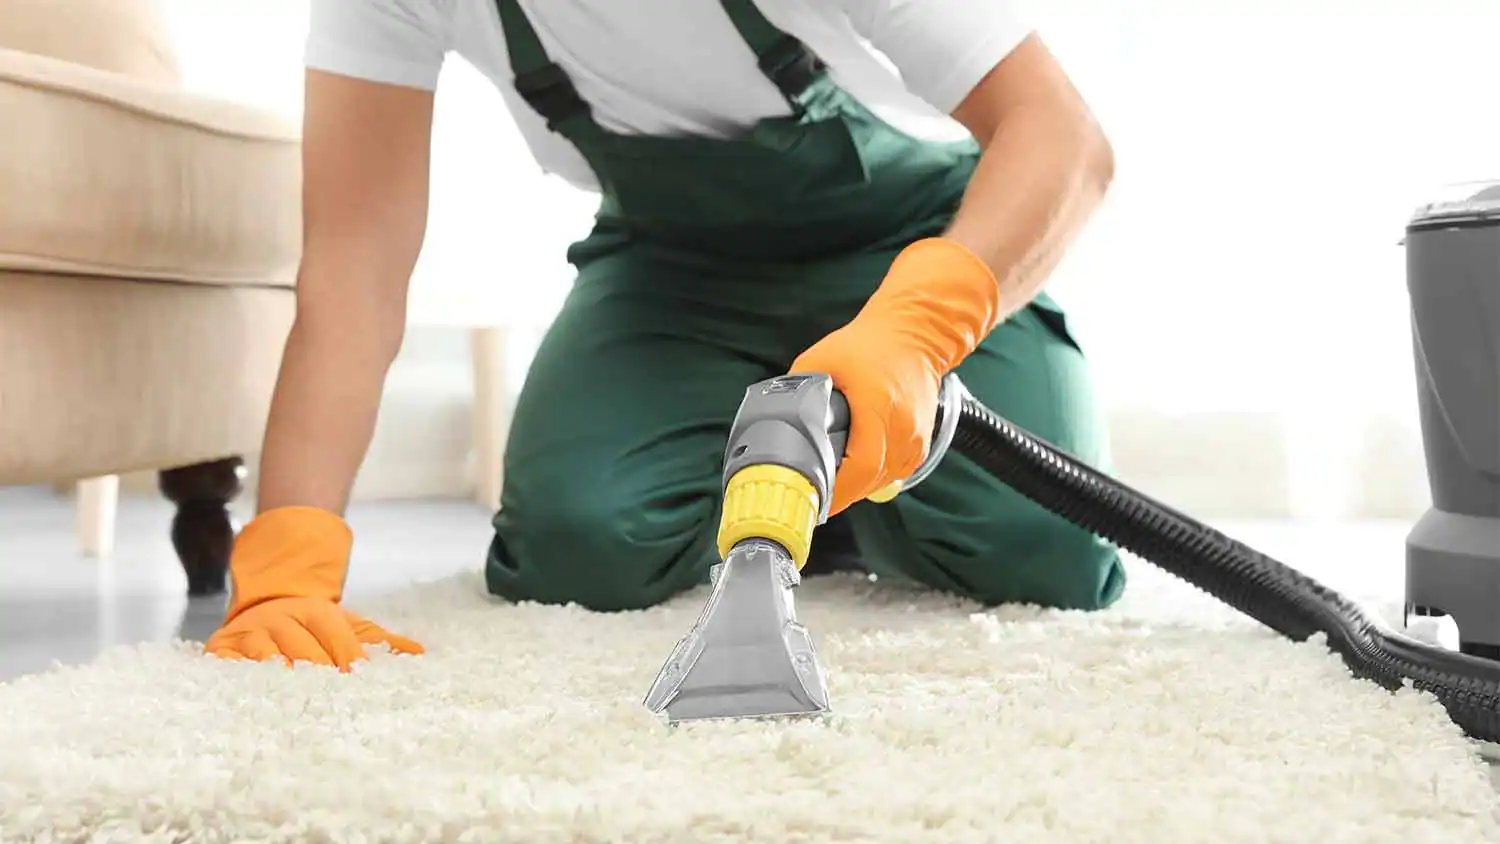 How Should I Prepare My Home For Professional Carpet Cleaning